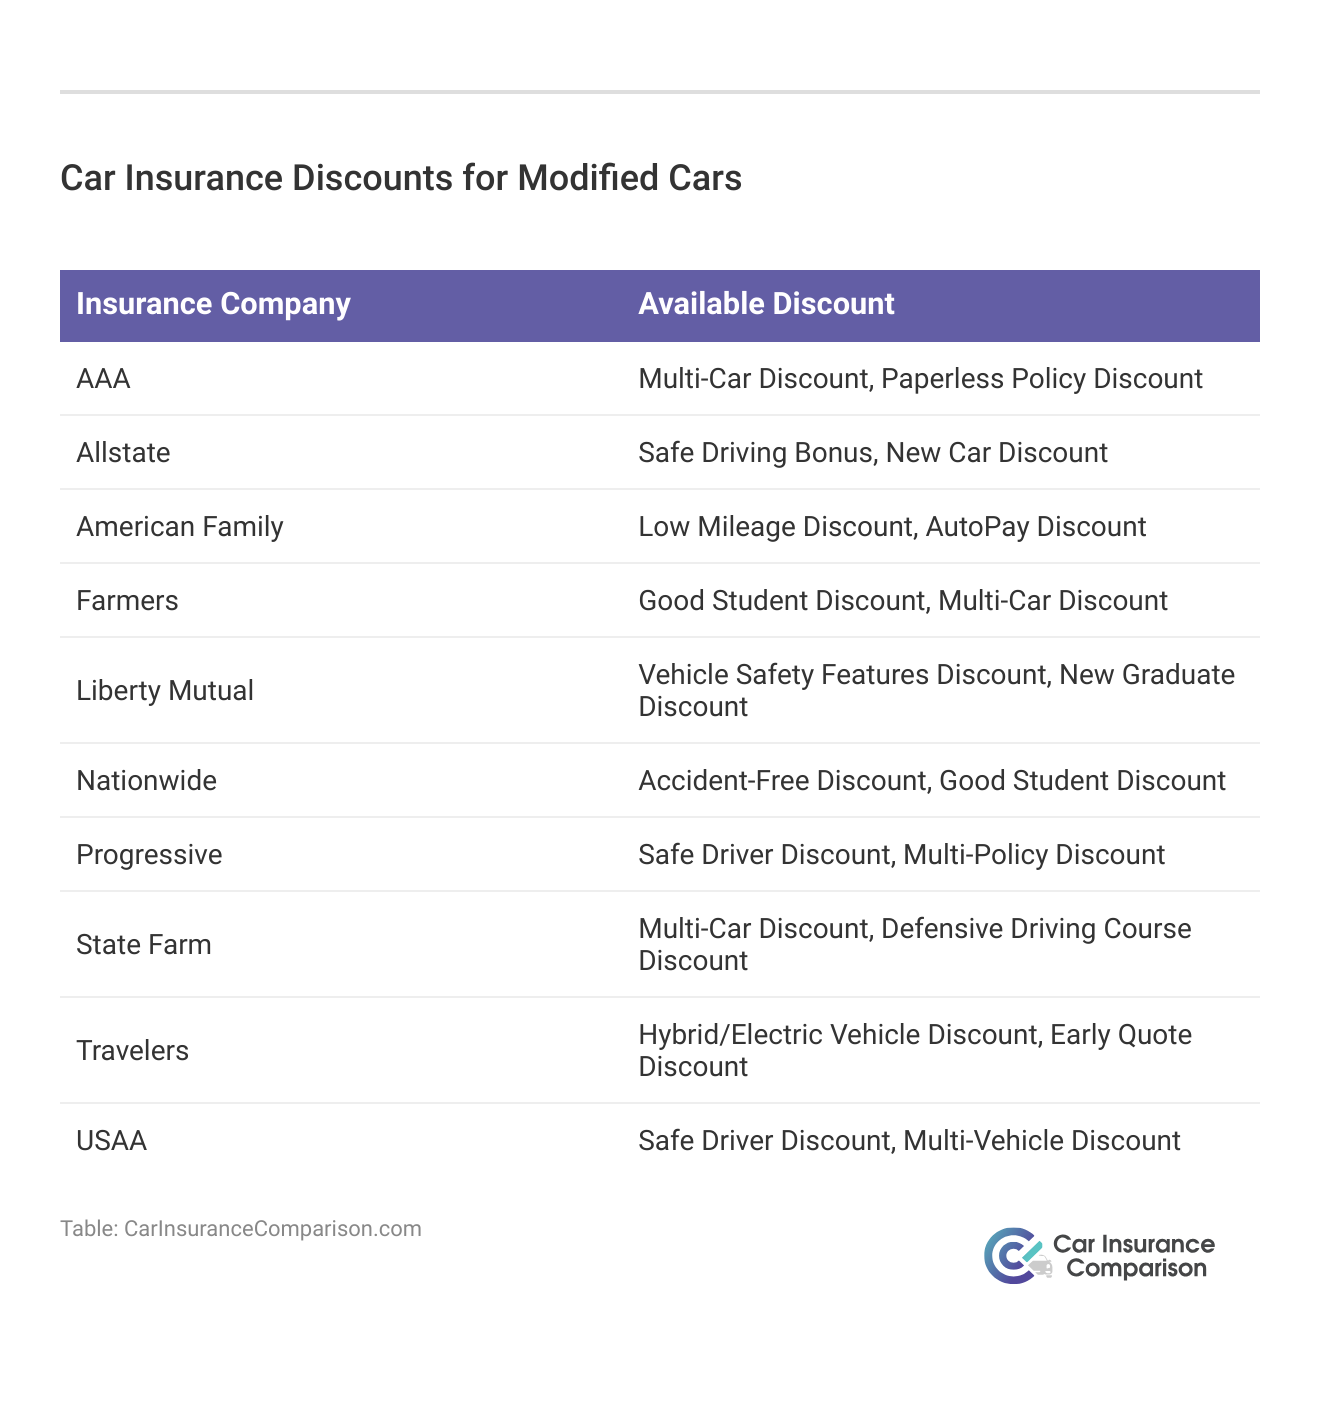 <h3>Car Insurance Discounts for Modified Cars</h3>